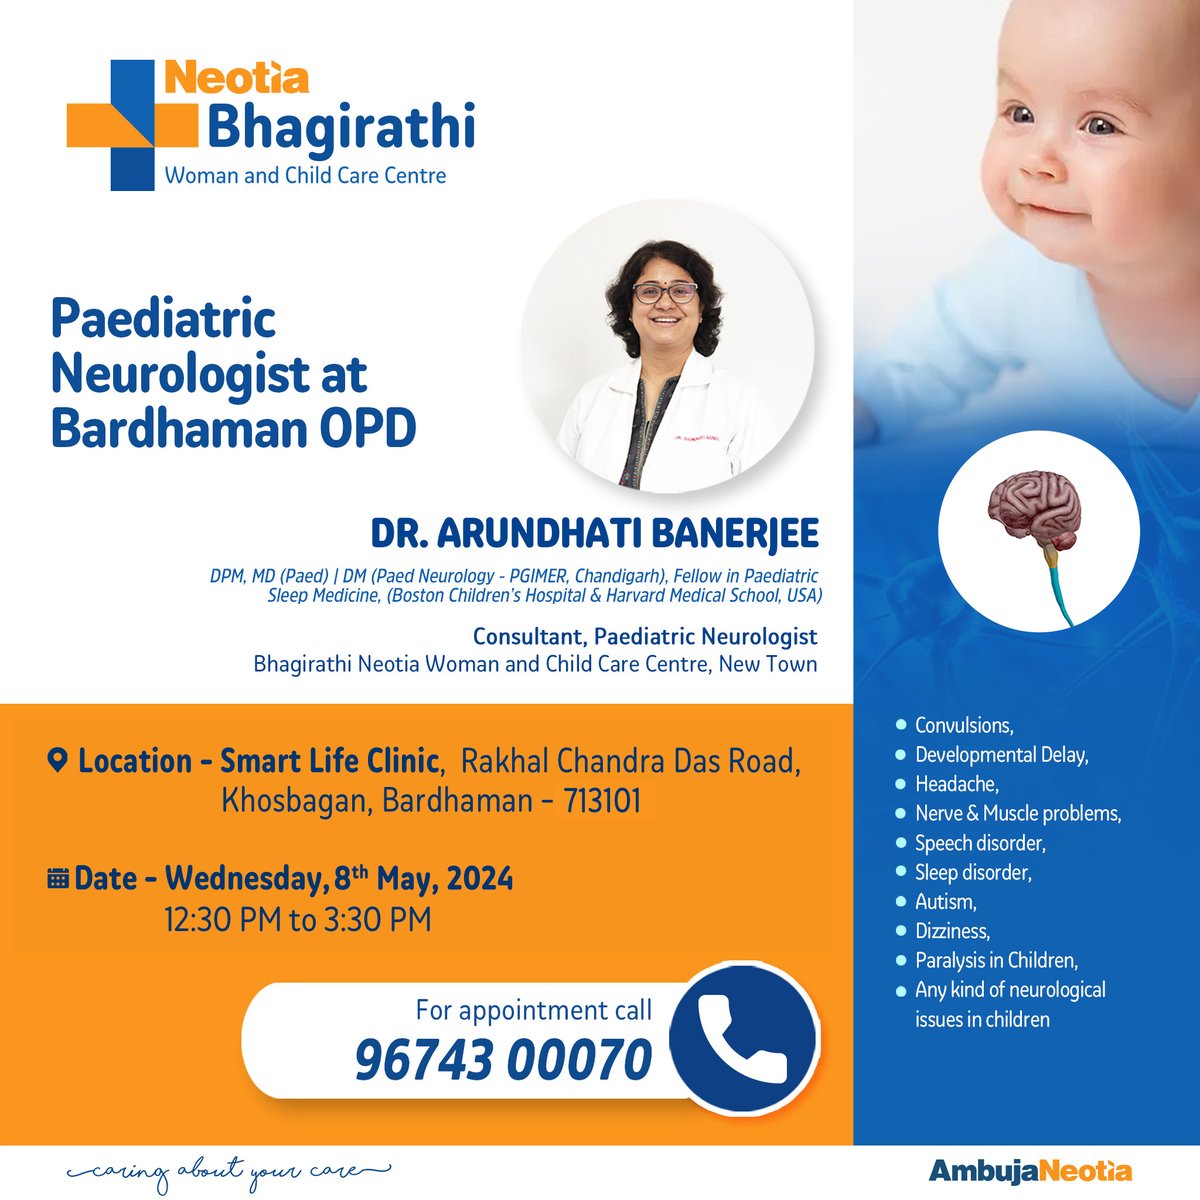 Paediatric Neurologist of #BhagirathiNeotiaWomanandChildCareCentreNewTown will be available on Wednesday, 8thMay 2024 at Smart Life Clinic, Bardhaman.
Contact  : 9674300070

#BNWCCC #CaringAboutYourCare #paedneuro #bardhamanclinic #childcare #healthcare #AmbujaNeotia